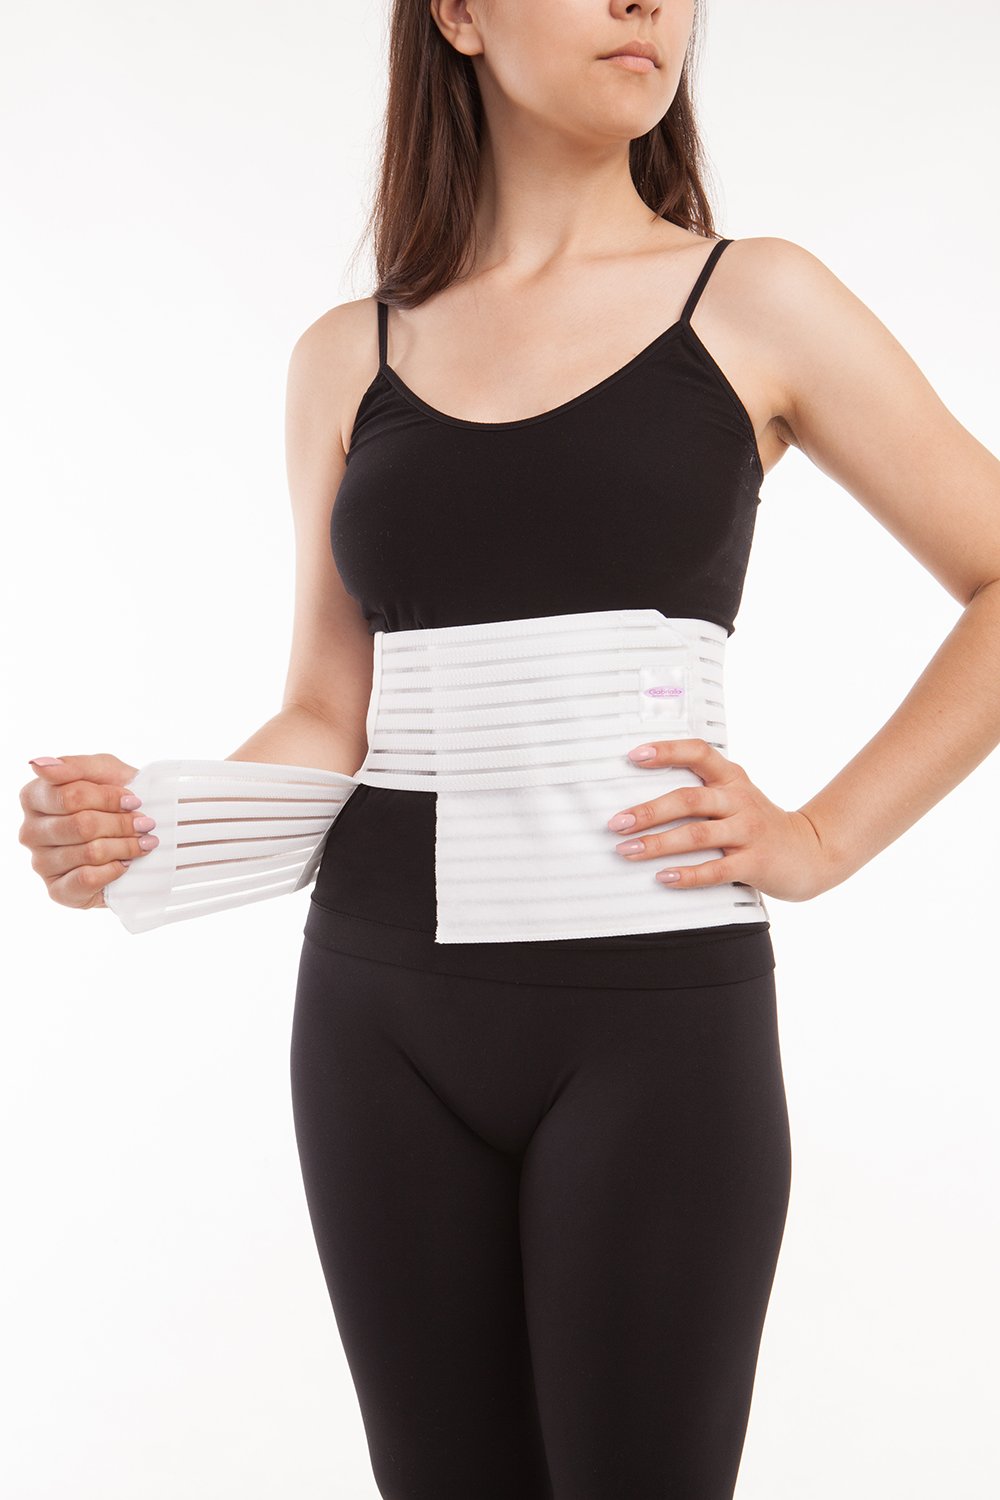  Gabrialla High Waisted Body Shaping Slimming Girdle Back and  Abdominal Support ASG-973 : Health & Household